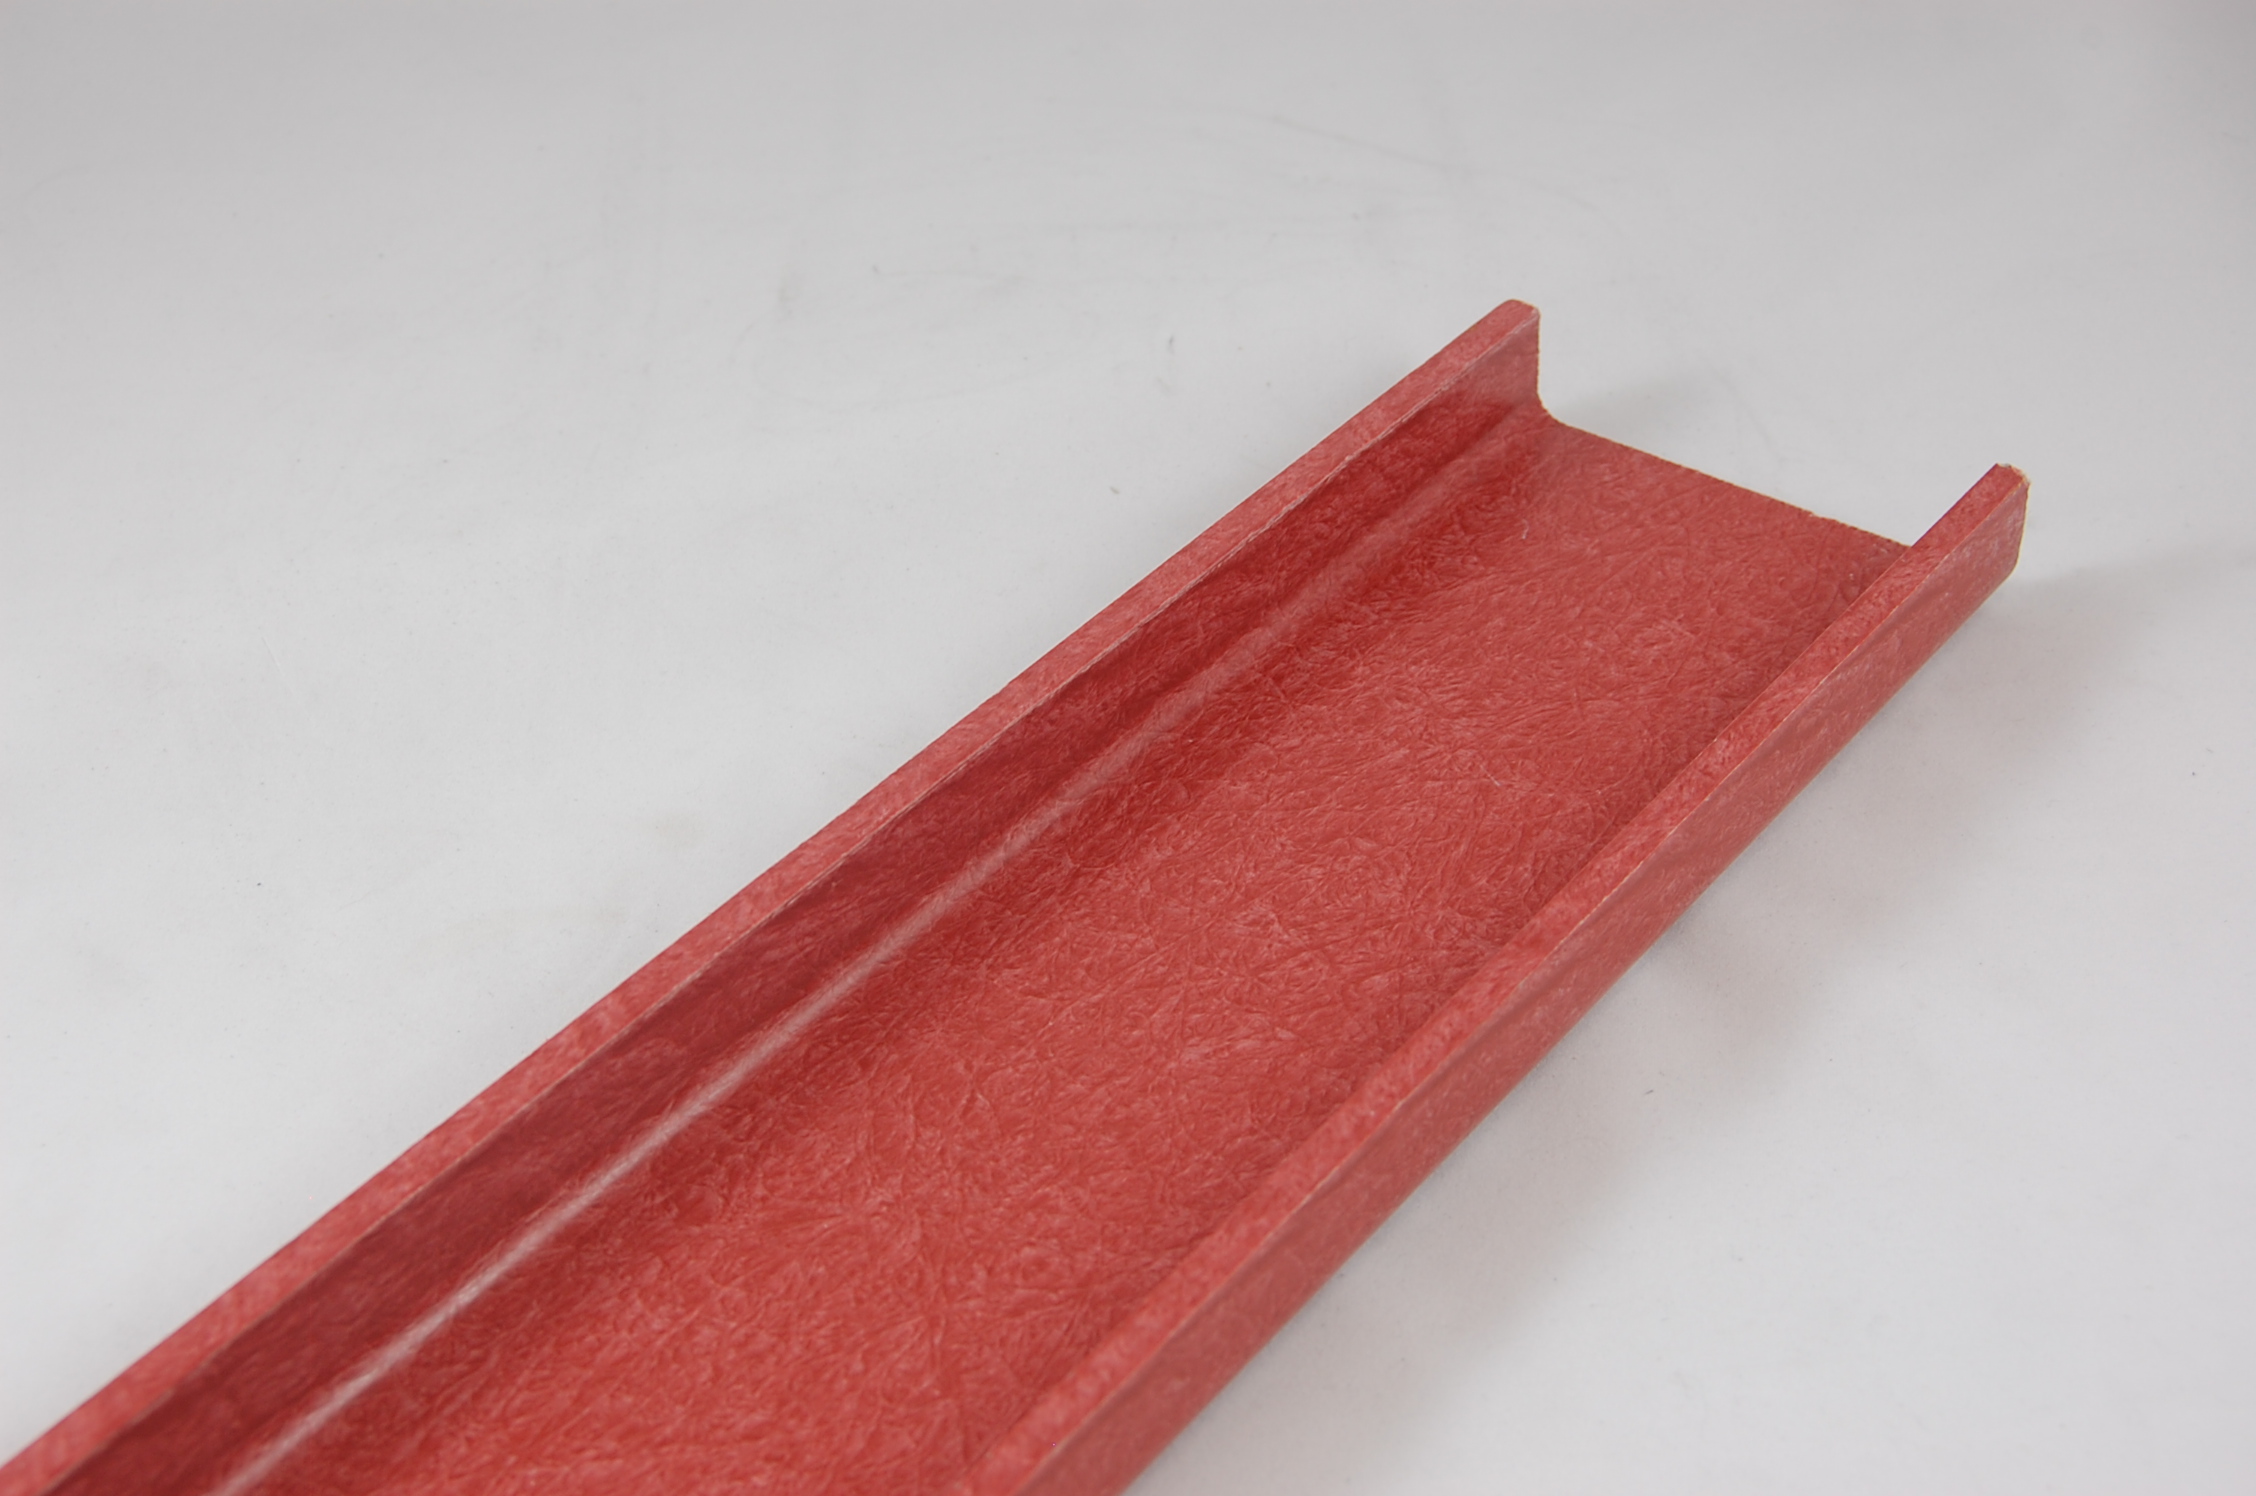 2"W x 9/16" Leg x 1/8" thick GLASROD® Grade 1130 Fiberglass-Reinforced Polyester Laminate Channel, red,  120"L channel